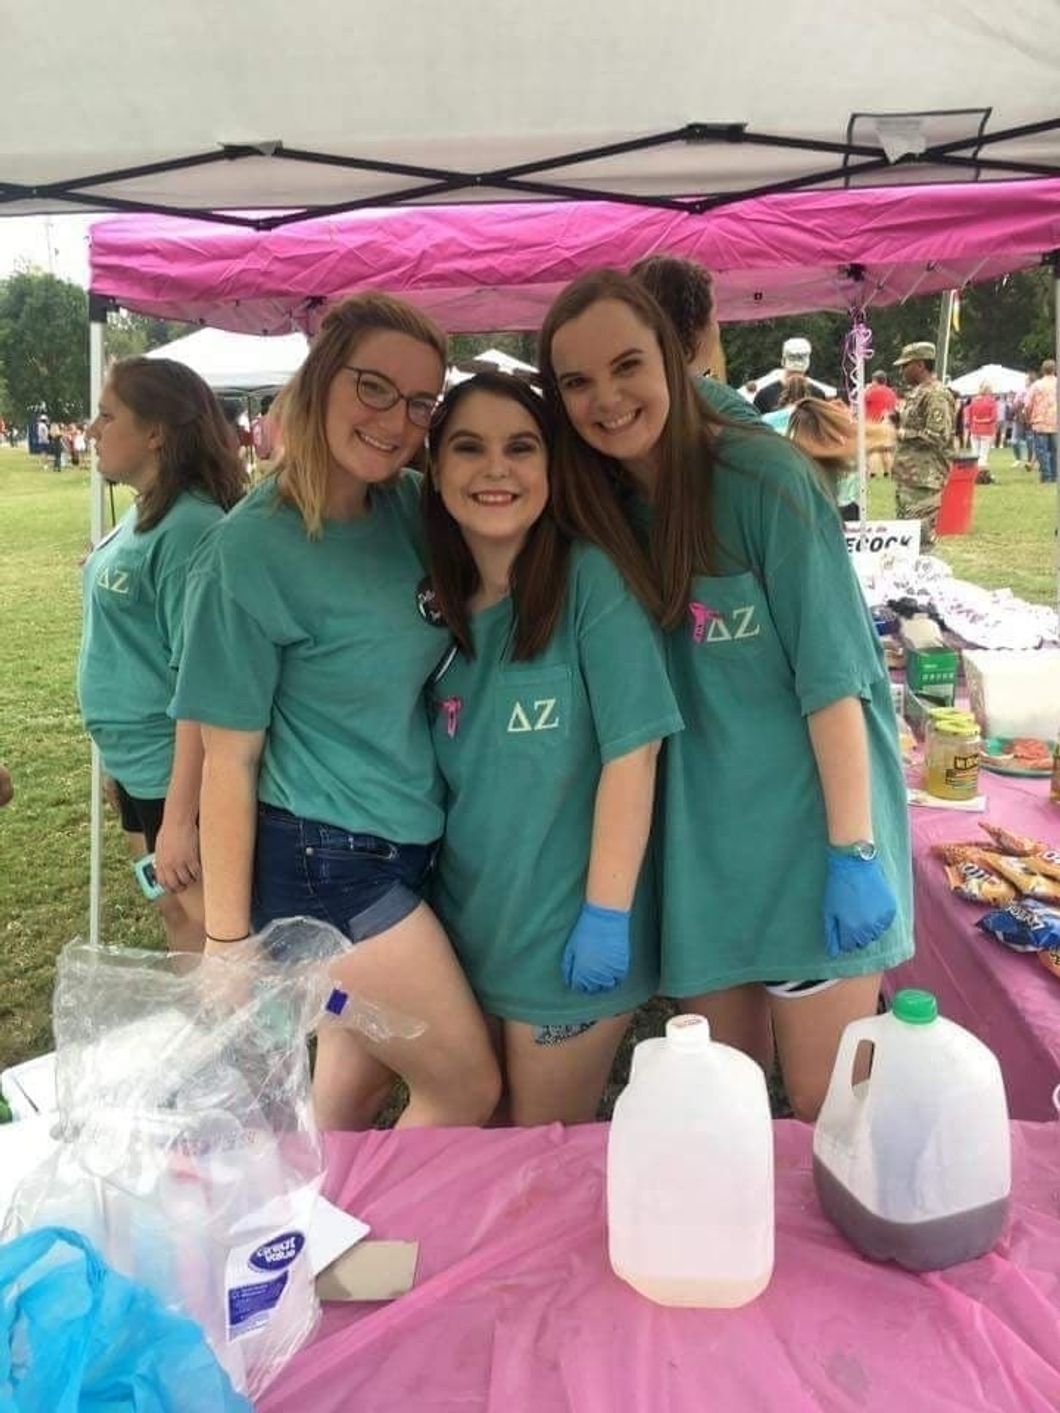 I Dropped My Sorority But Not For The Reasons You'd Think